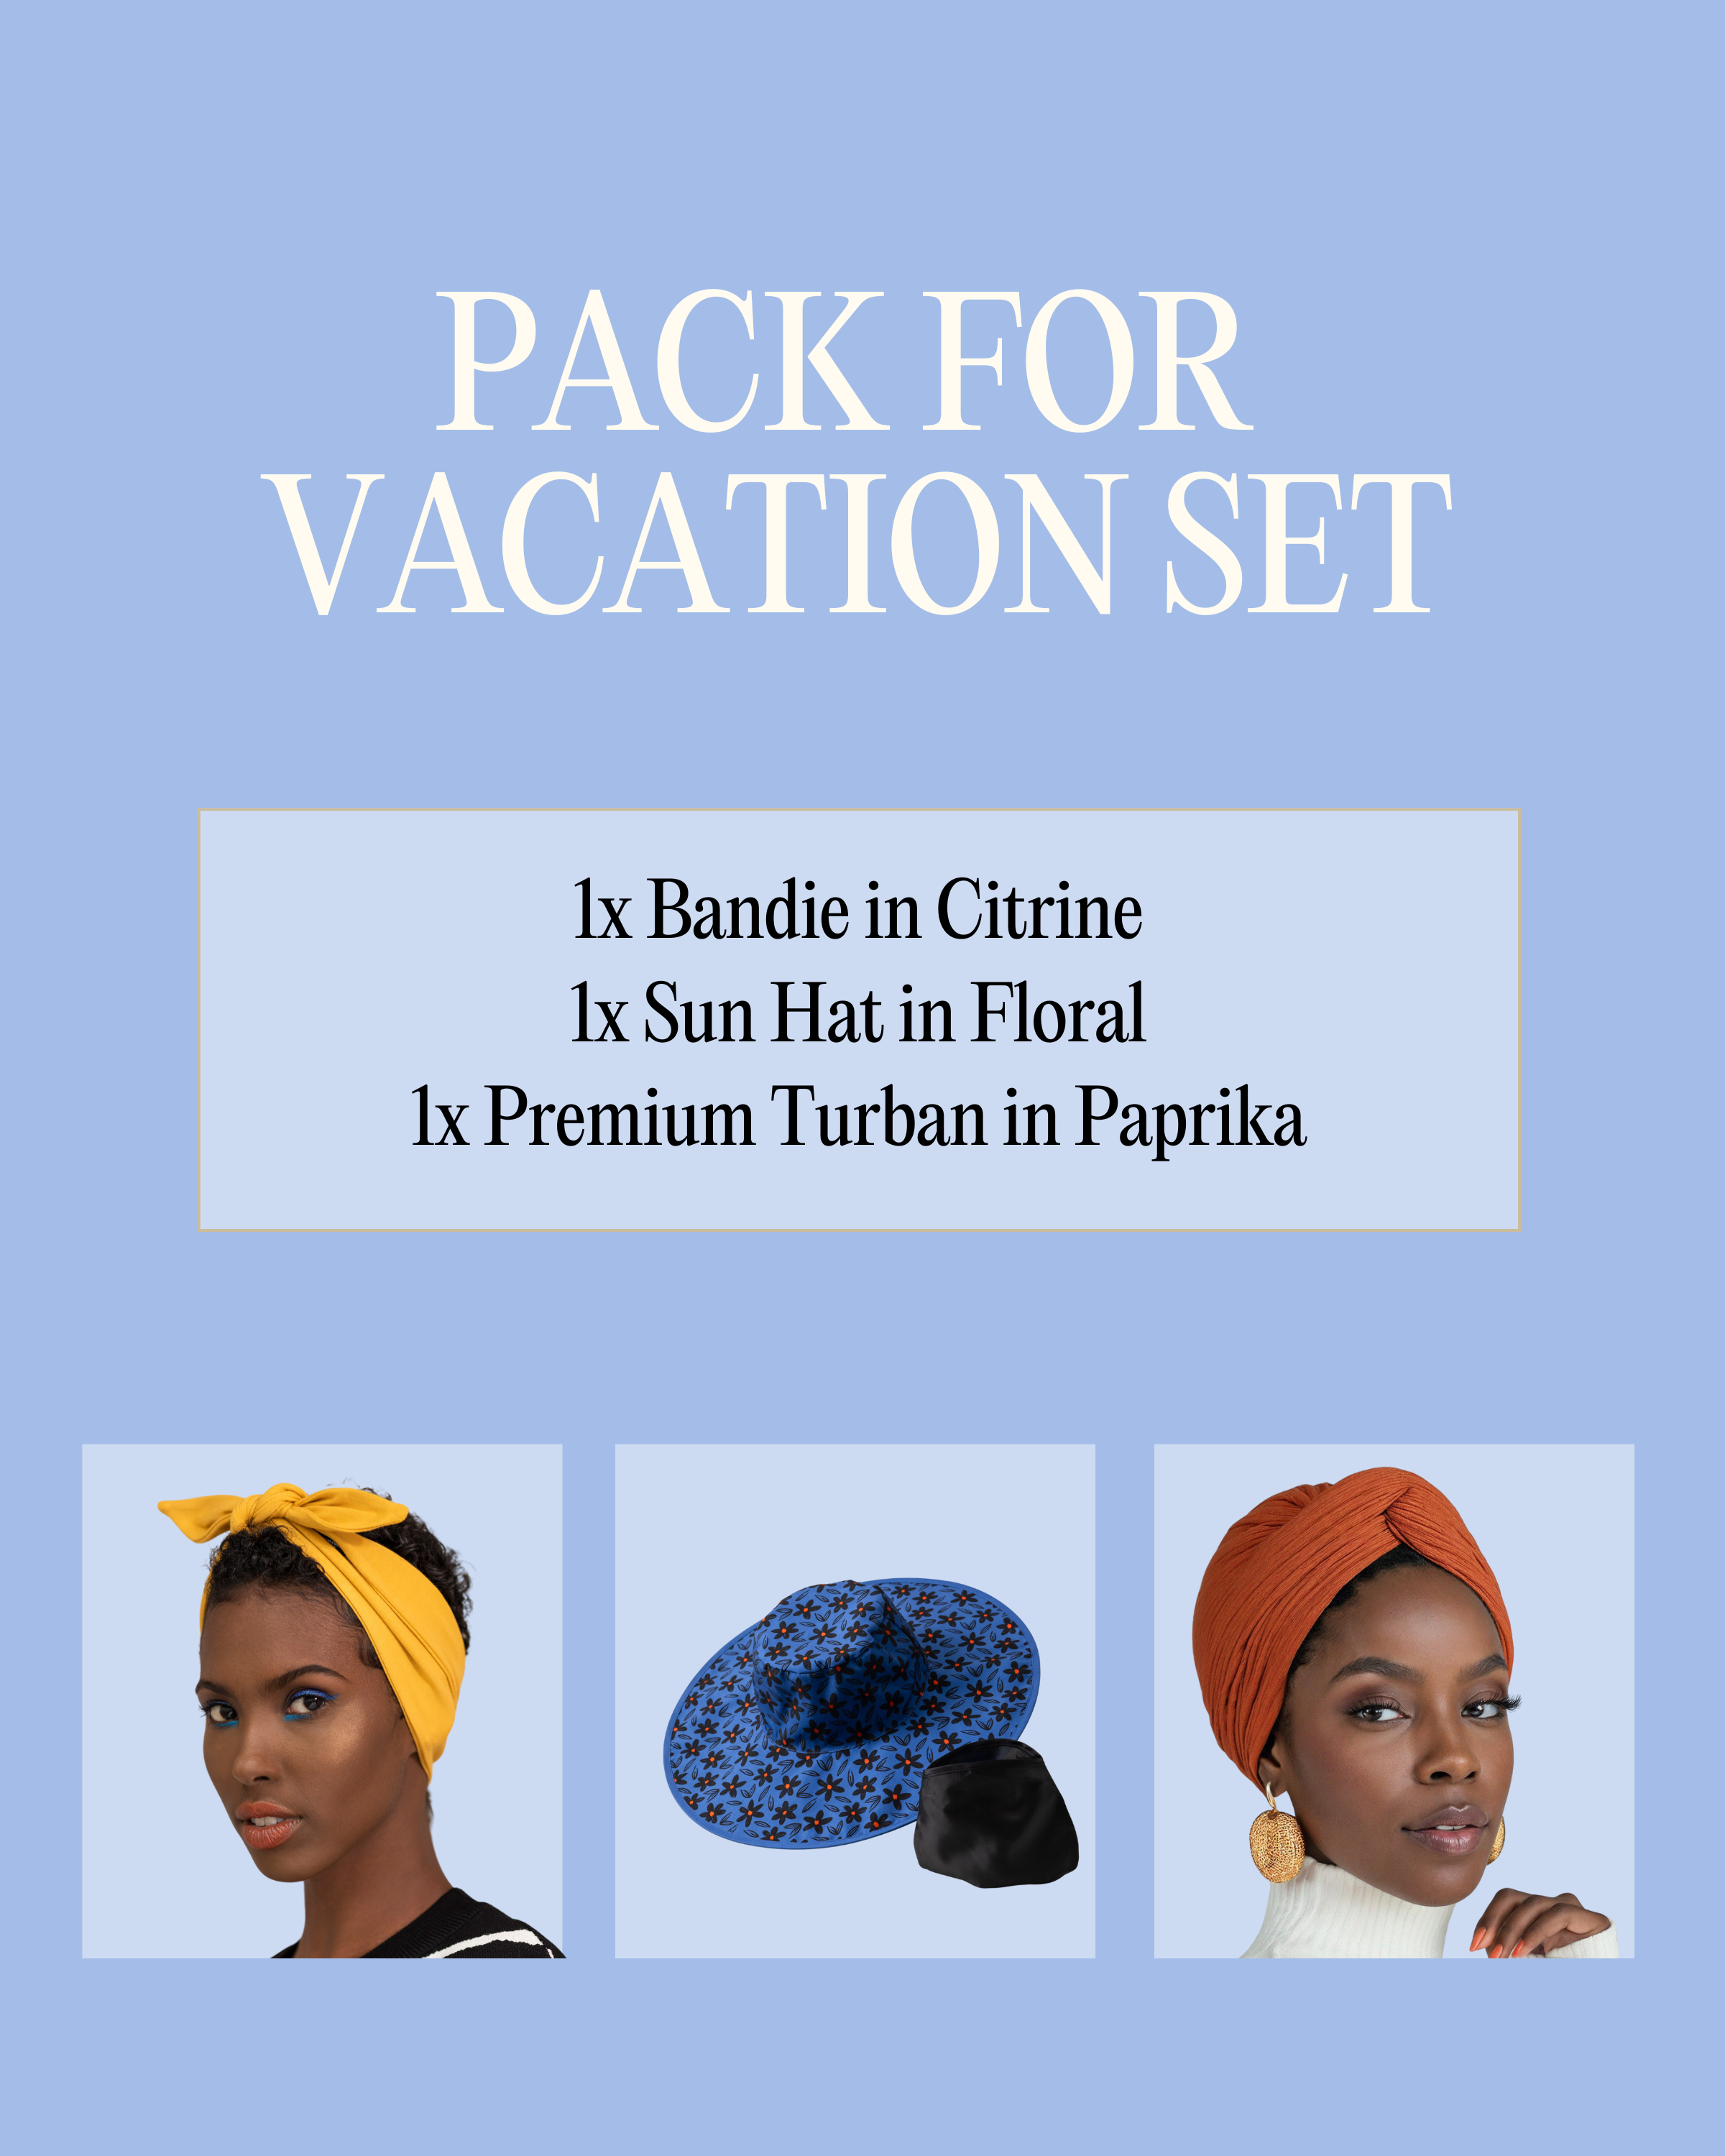 Pack for Vacation Set